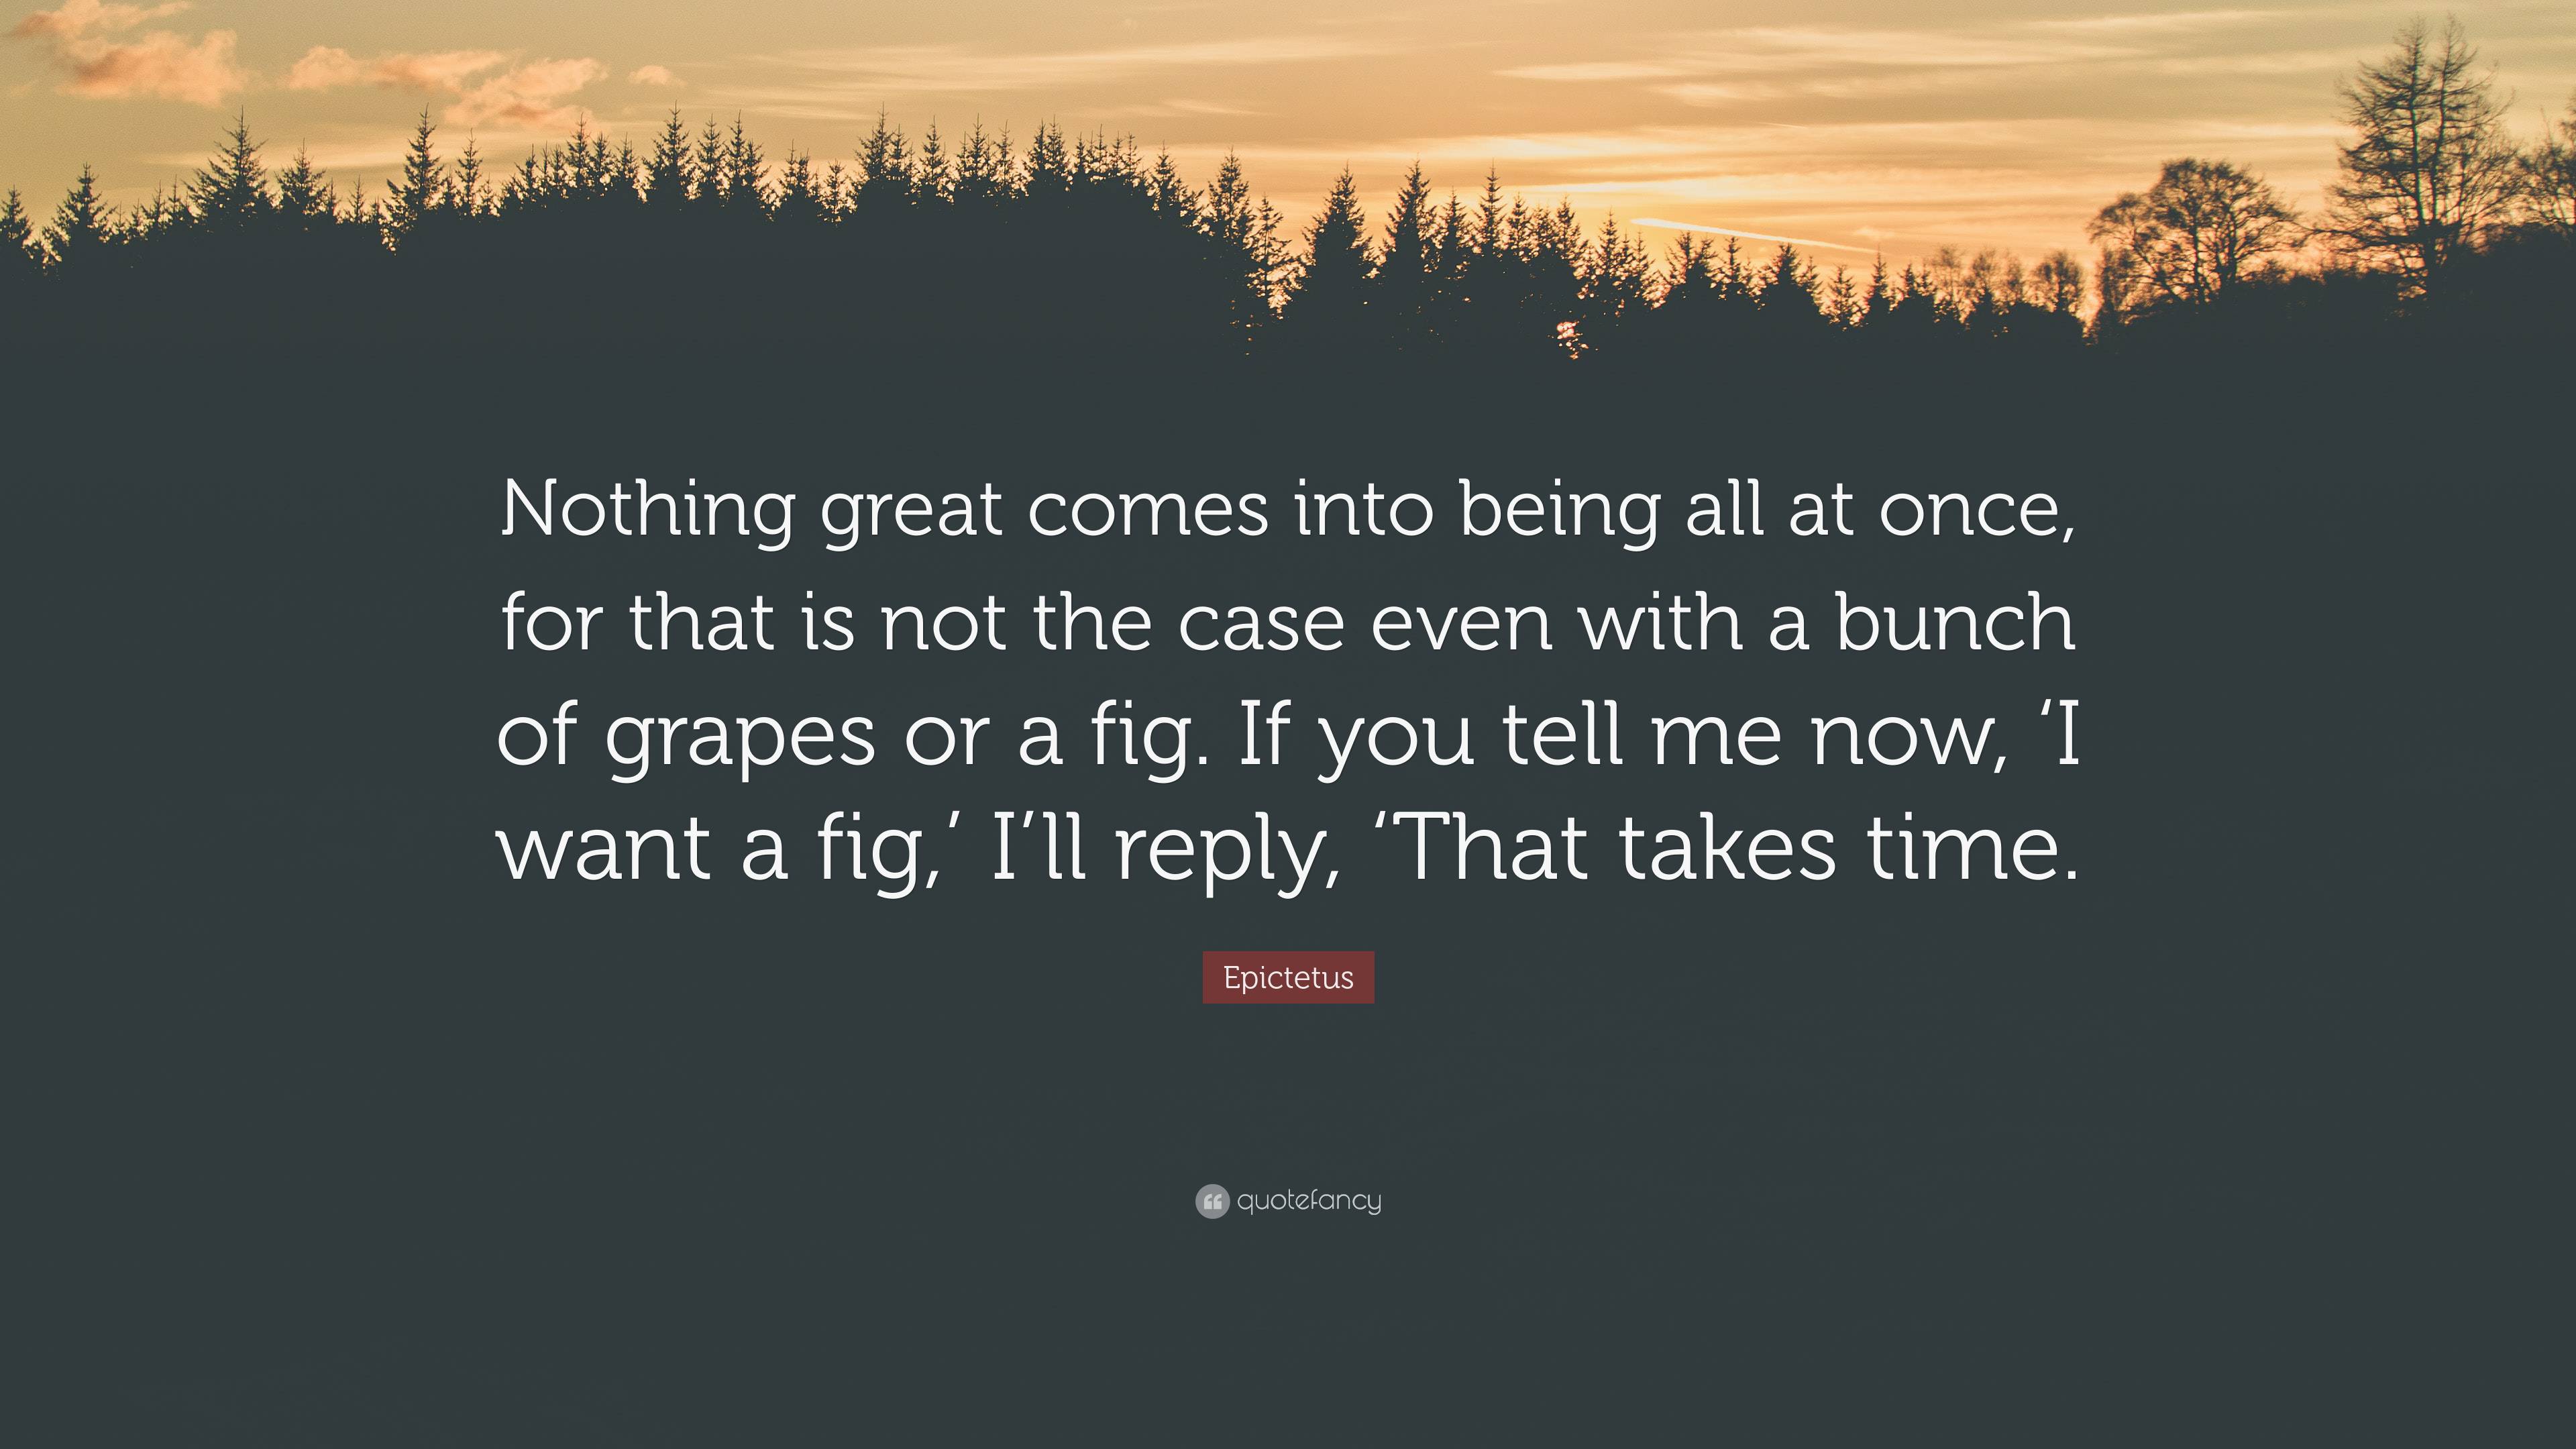 Epictetus Quote: “Nothing great comes into being all at once, for that is not the case even with a bunch of grapes or a fig. If you tell m.”